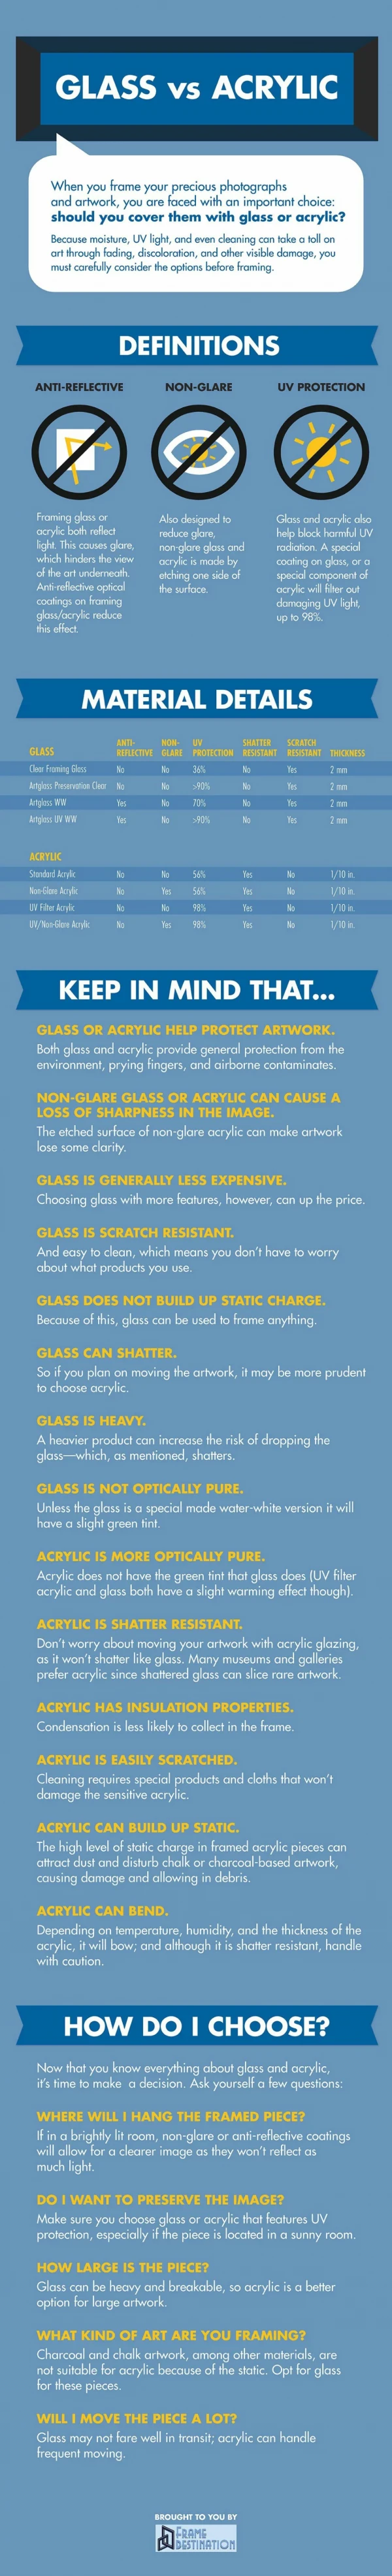 Glass vs Acrylic: How to Choose a Framing Material [INFOGRAPHIC]